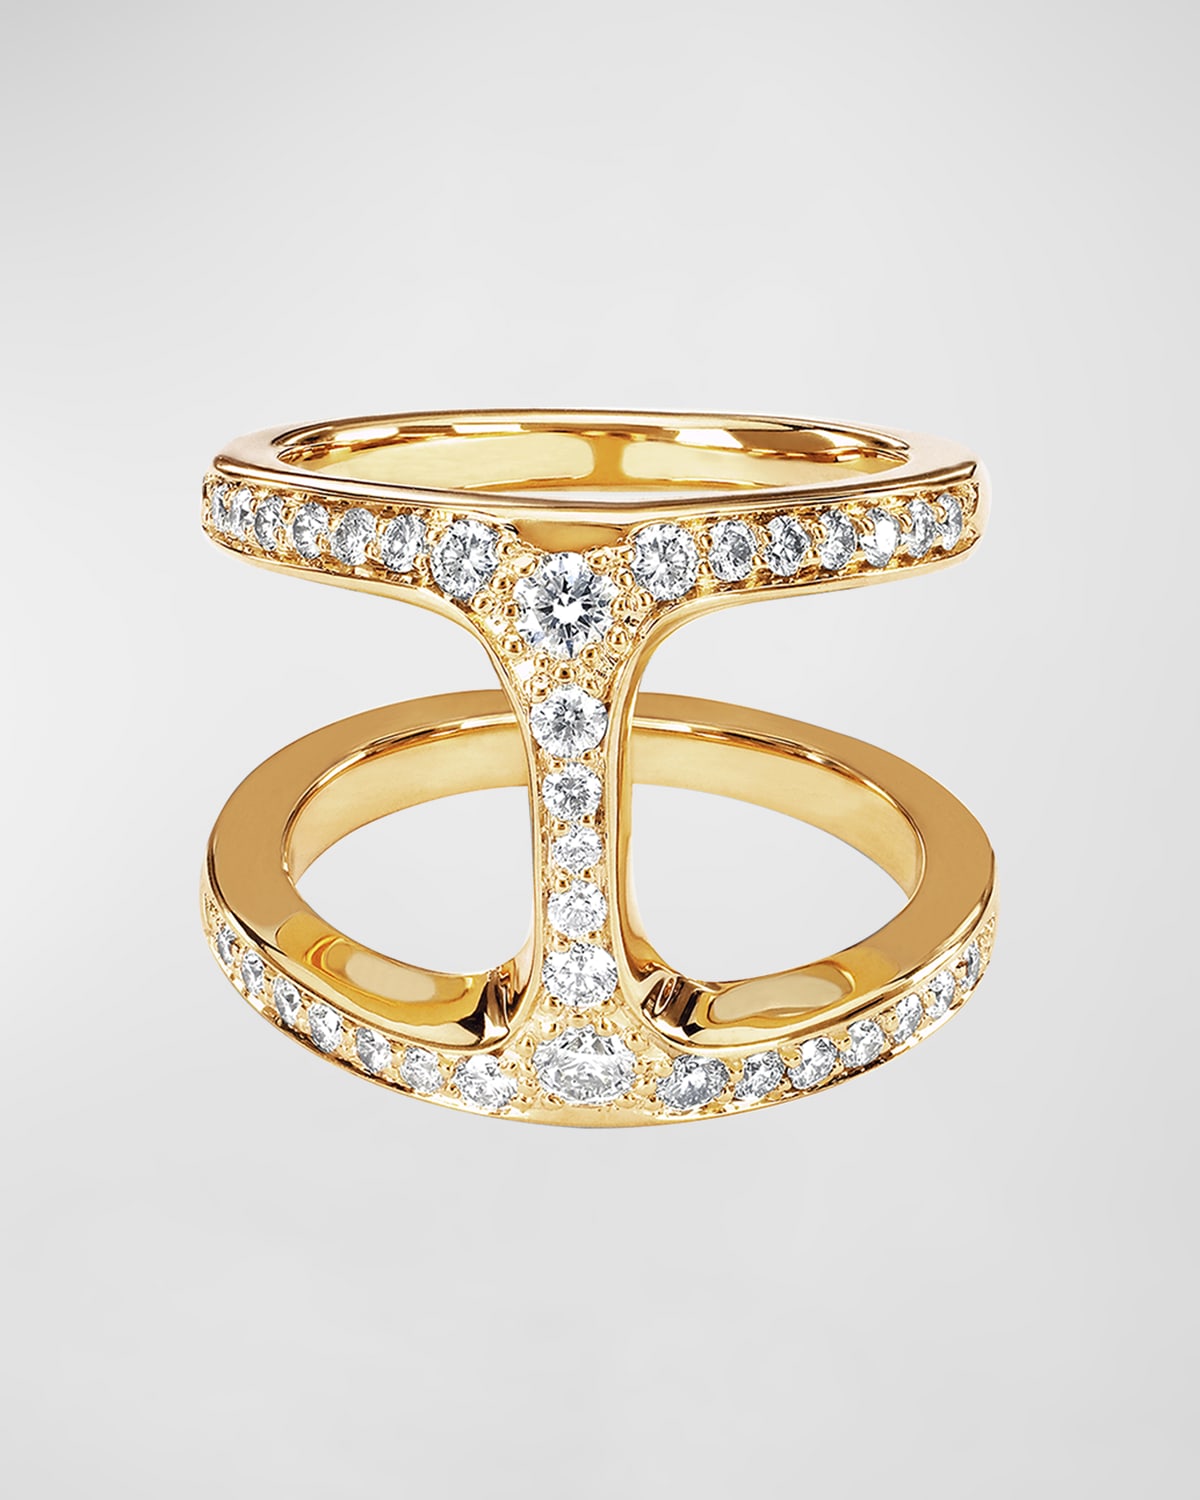 Dame Phantom Ring with Diamonds and 18k Yellow Gold, Size 6-8